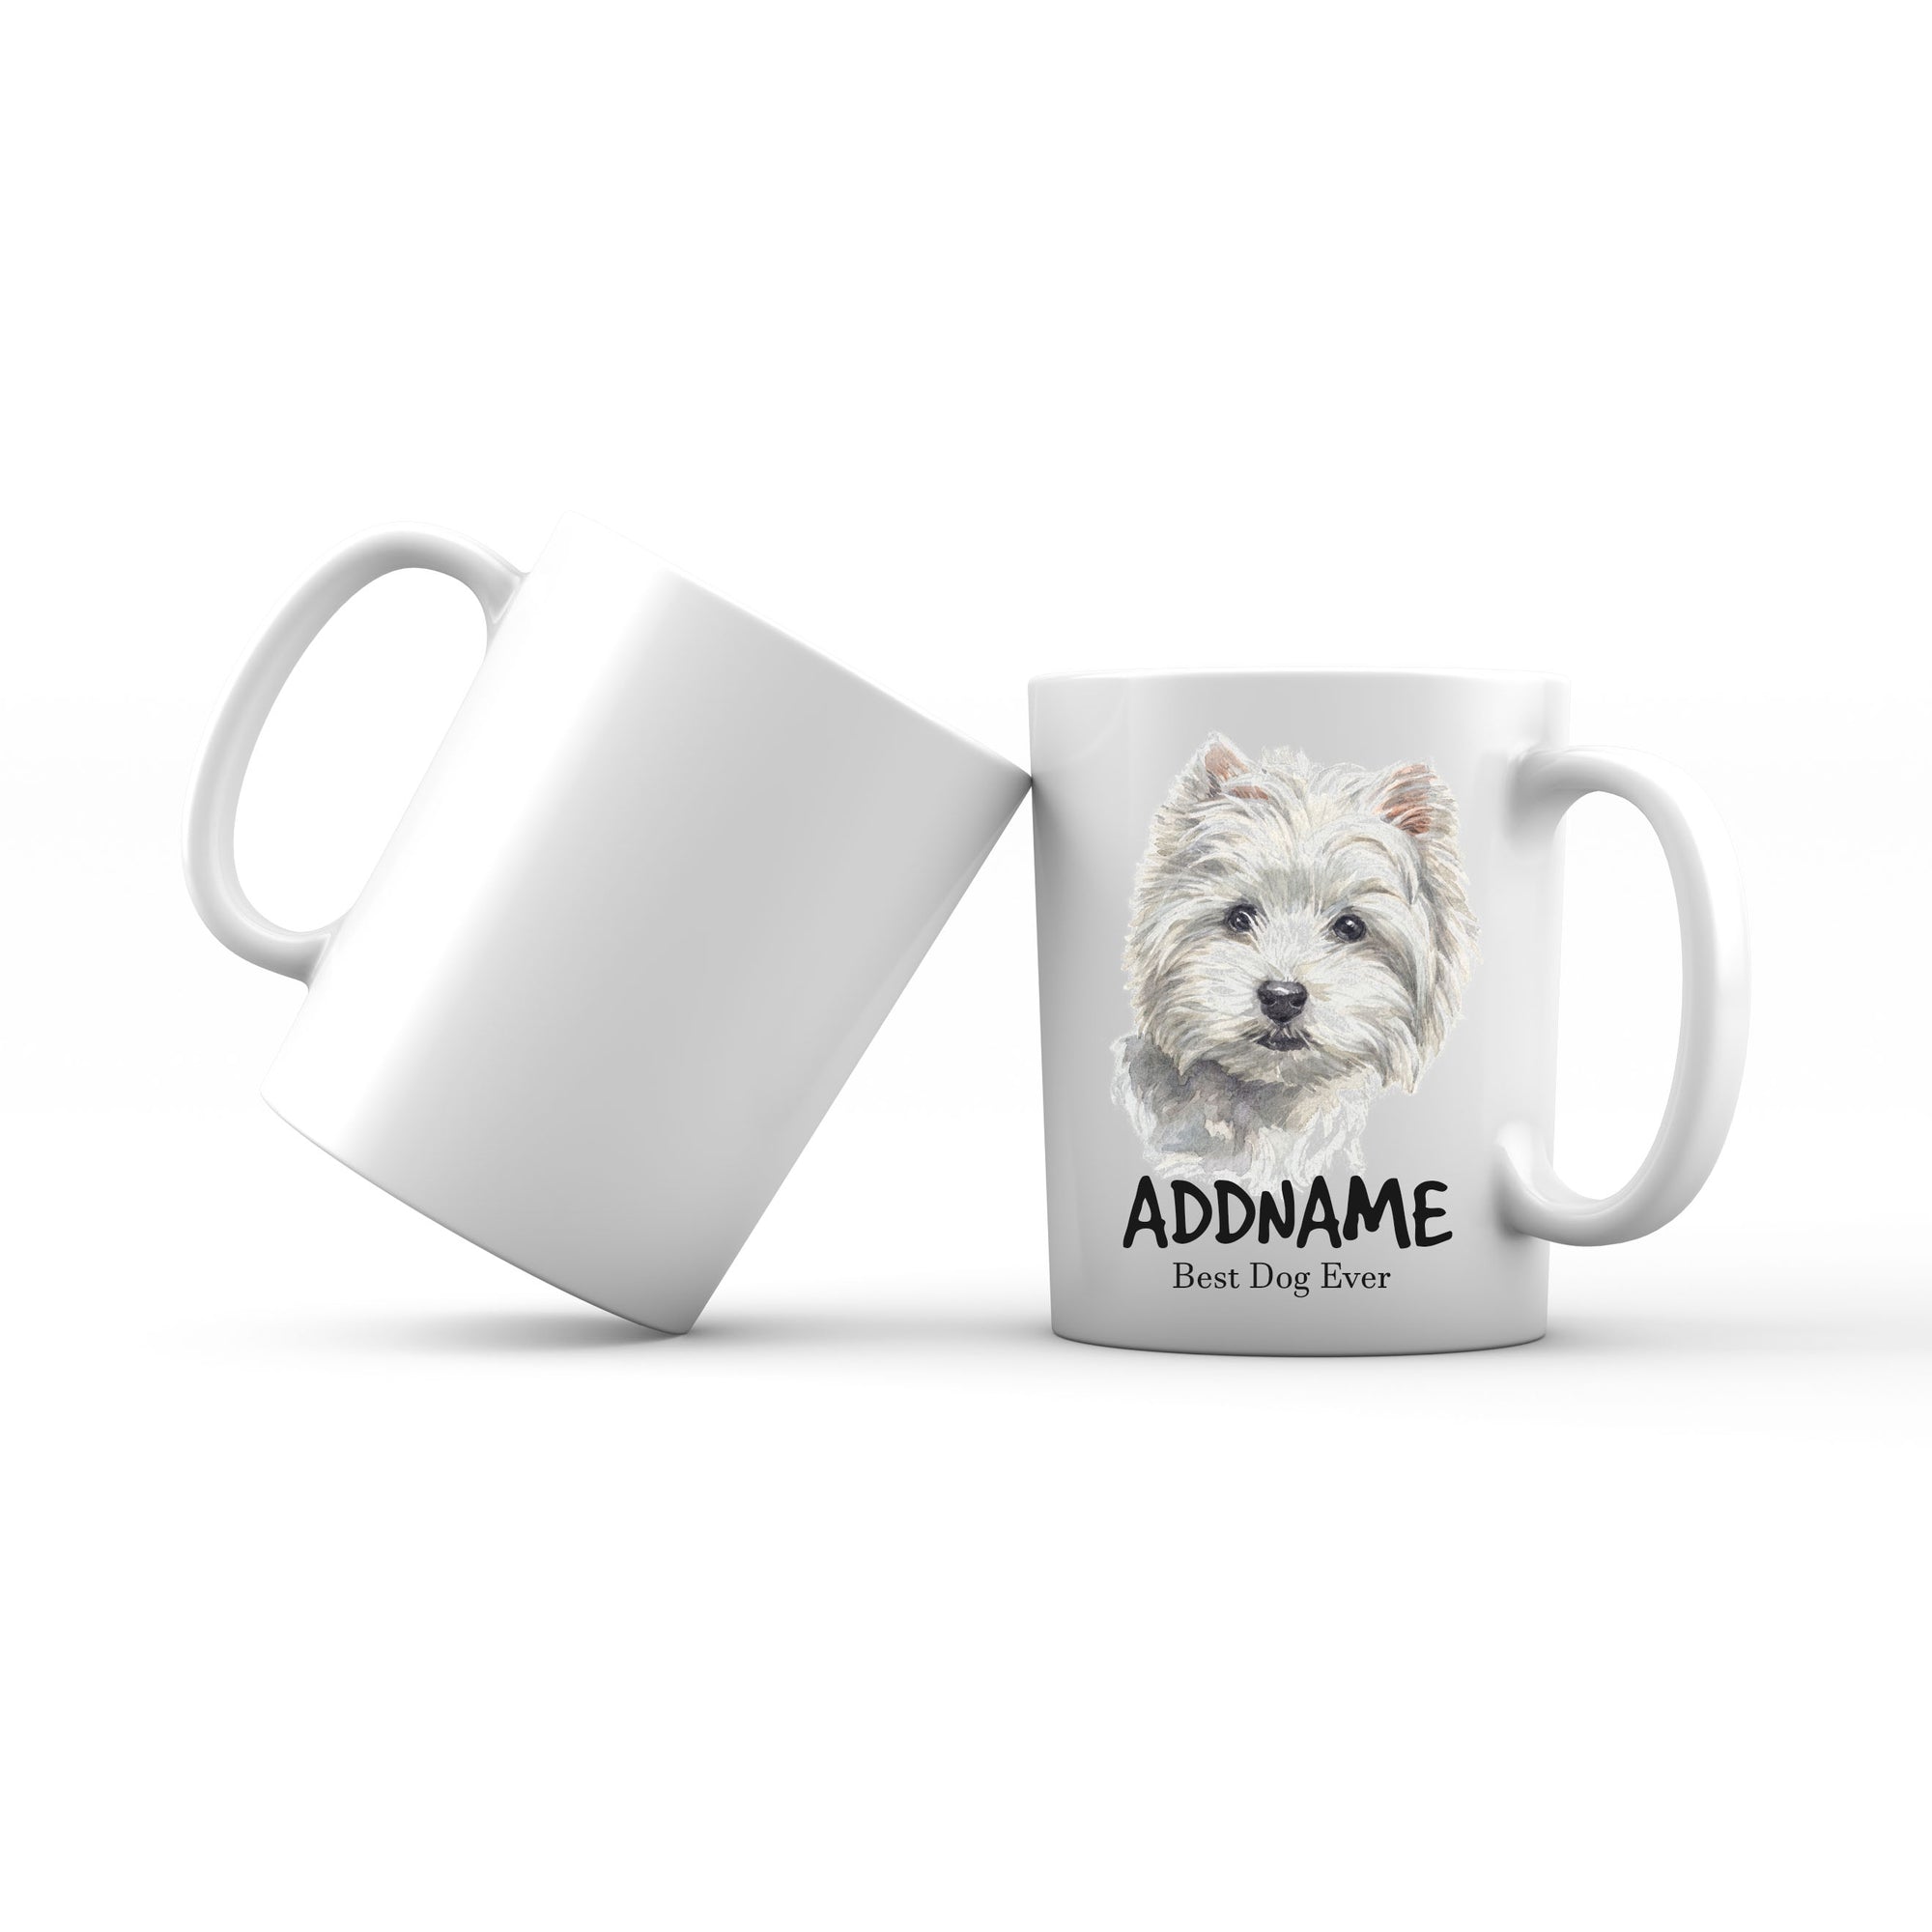 Watercolor Dog West Highland White Terrier Small Best Dog Ever Addname Mug